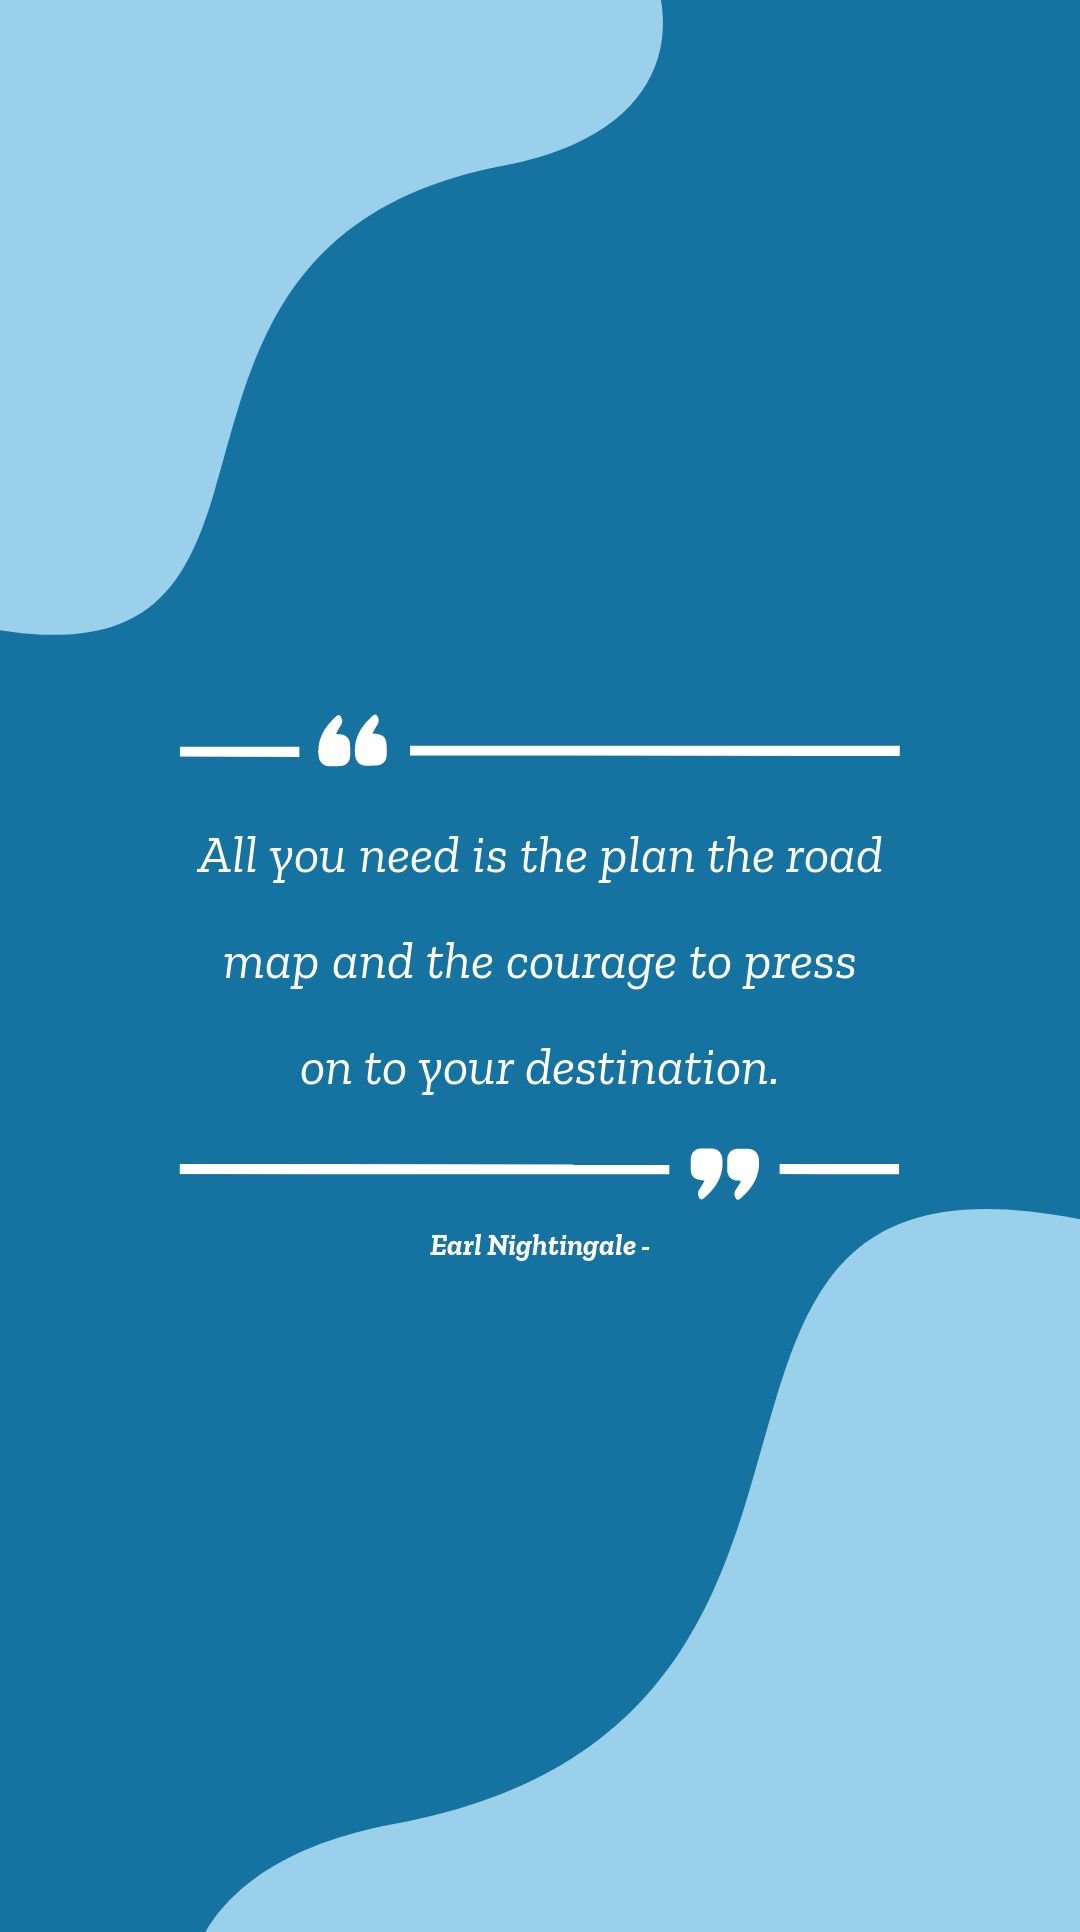 Earl Nightingale - All you need is the plan the road map and the courage to press on to your destination.